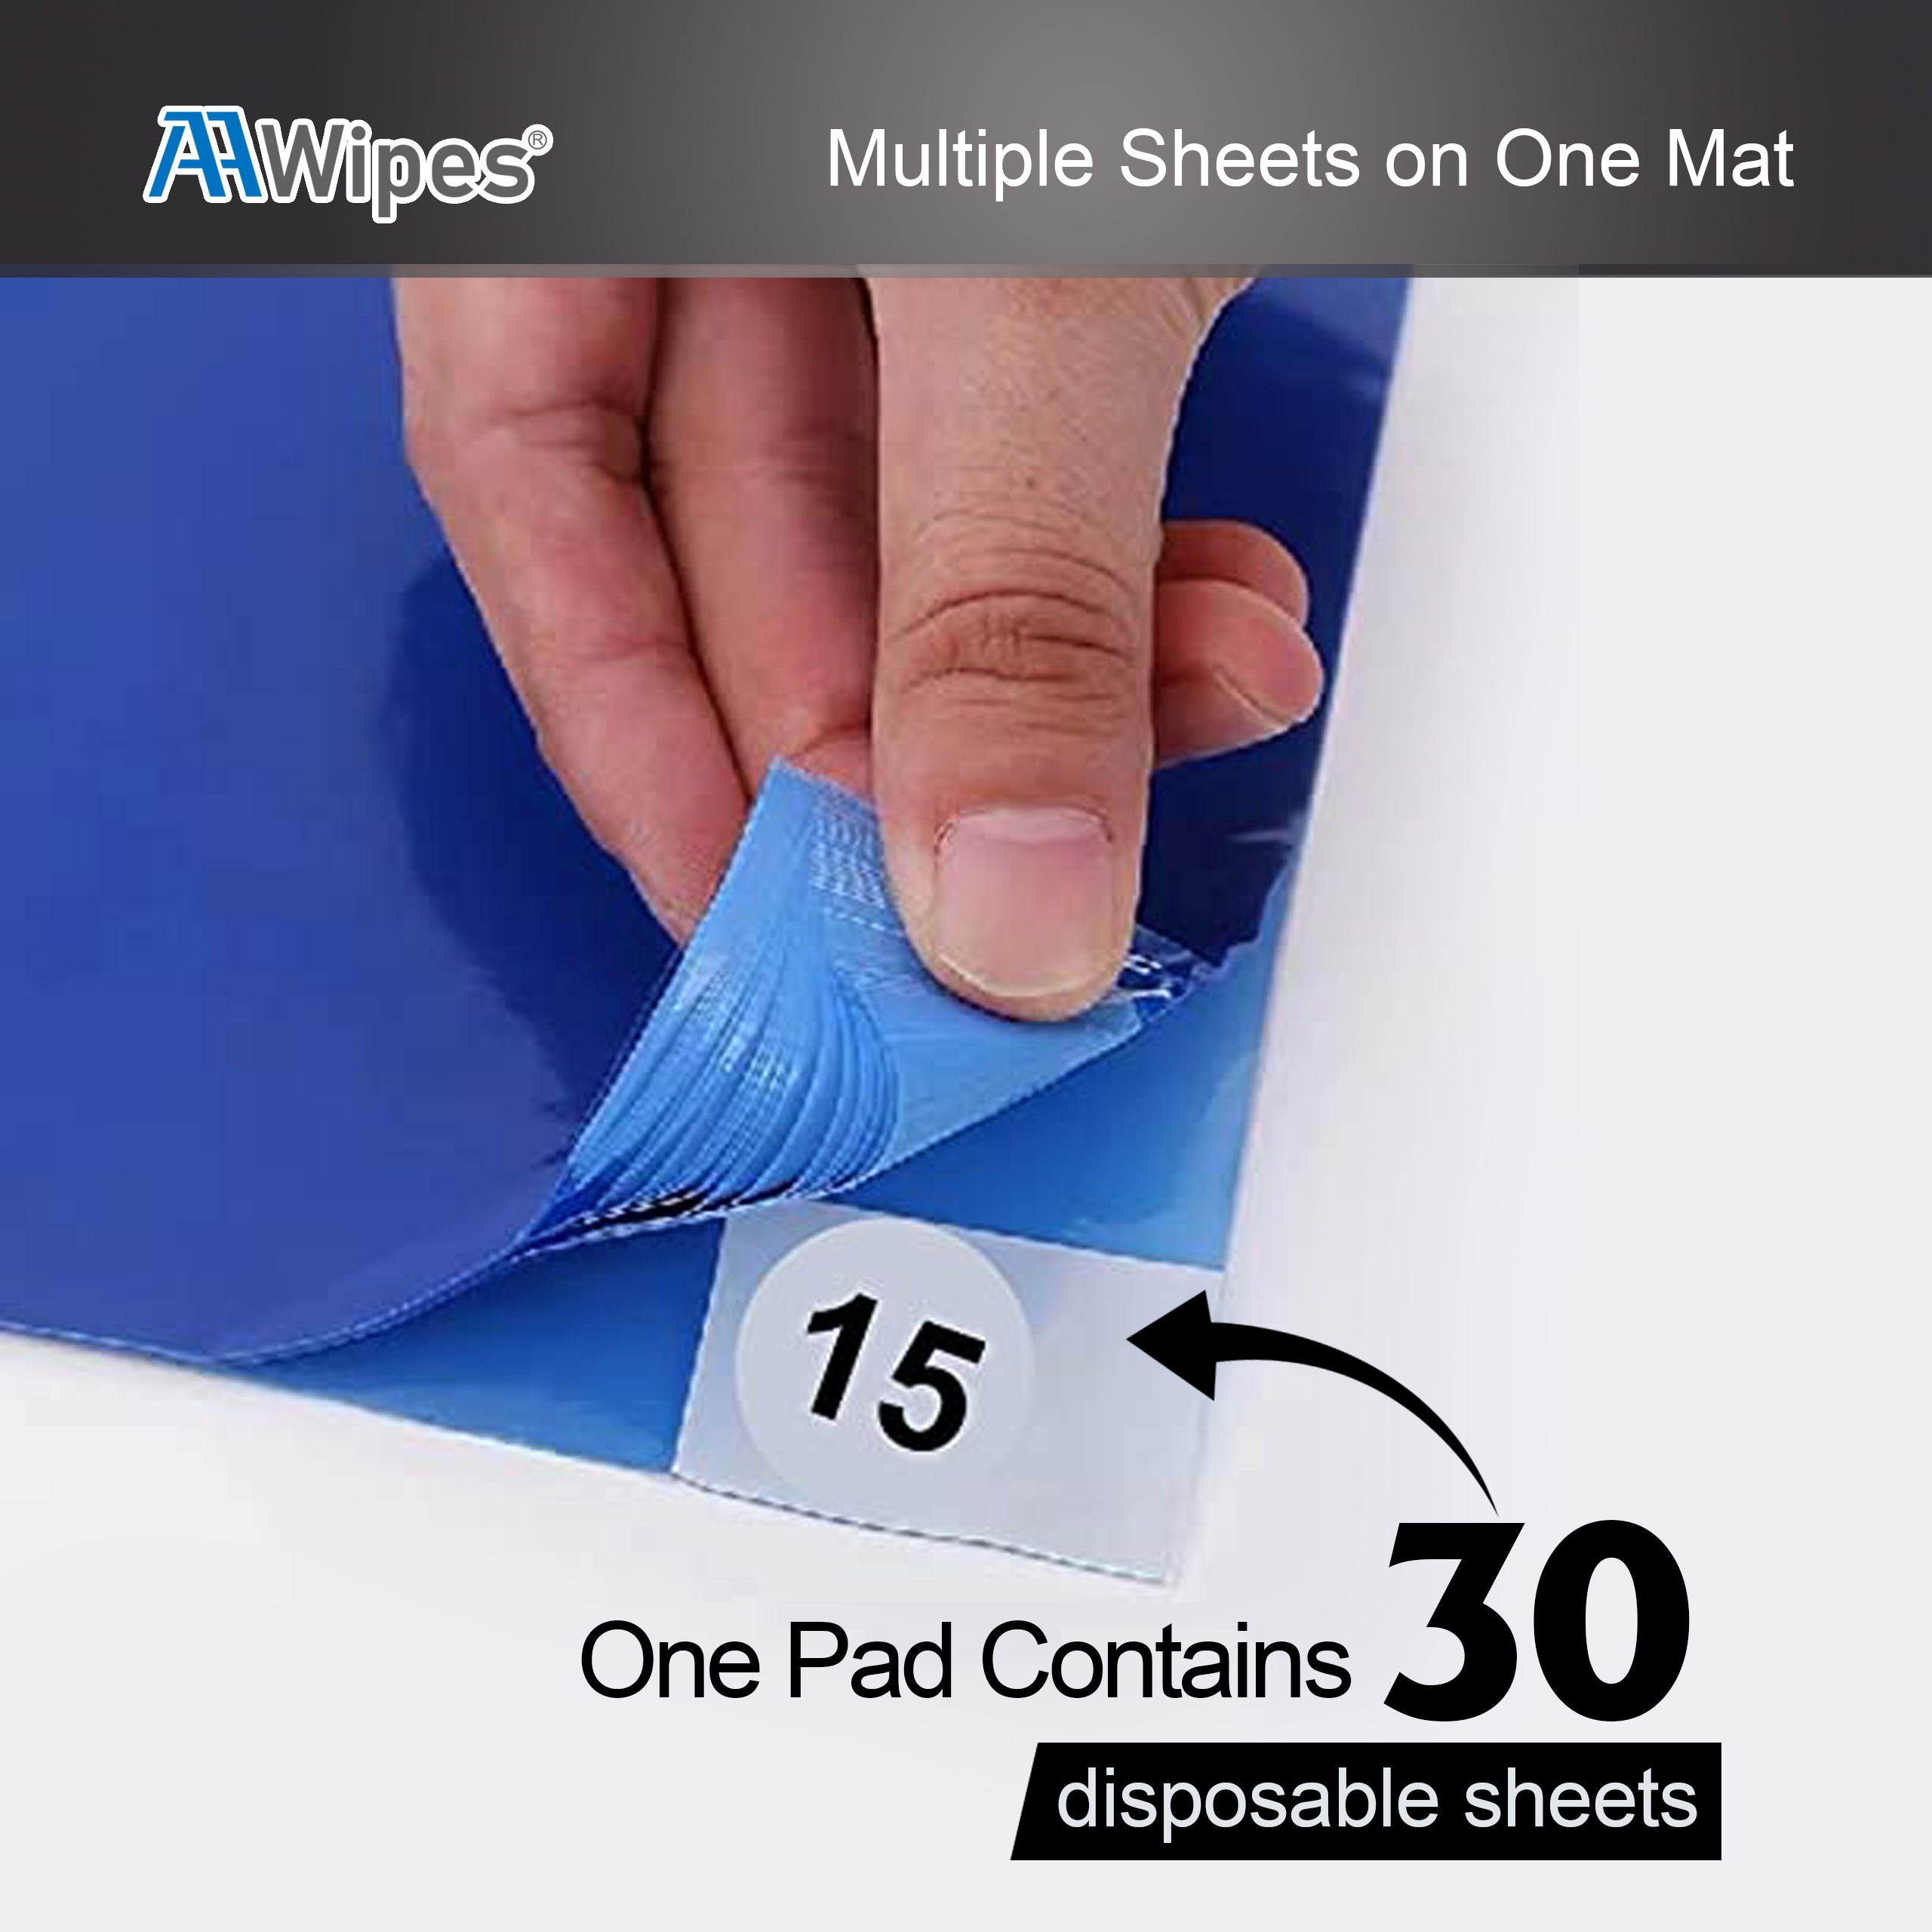 Cleanroom Sticky Floor Mats 18"X36" Blue for Pharmaceuticals,Food Processing, Hospital, Lab, Biotechnology, Automotive, Construction, Health Care, Manufacturing, Semiconductor  (6,000 Sheets/200 Mats/20 Boxs/Case) (No. IPSM-1836-300-B)